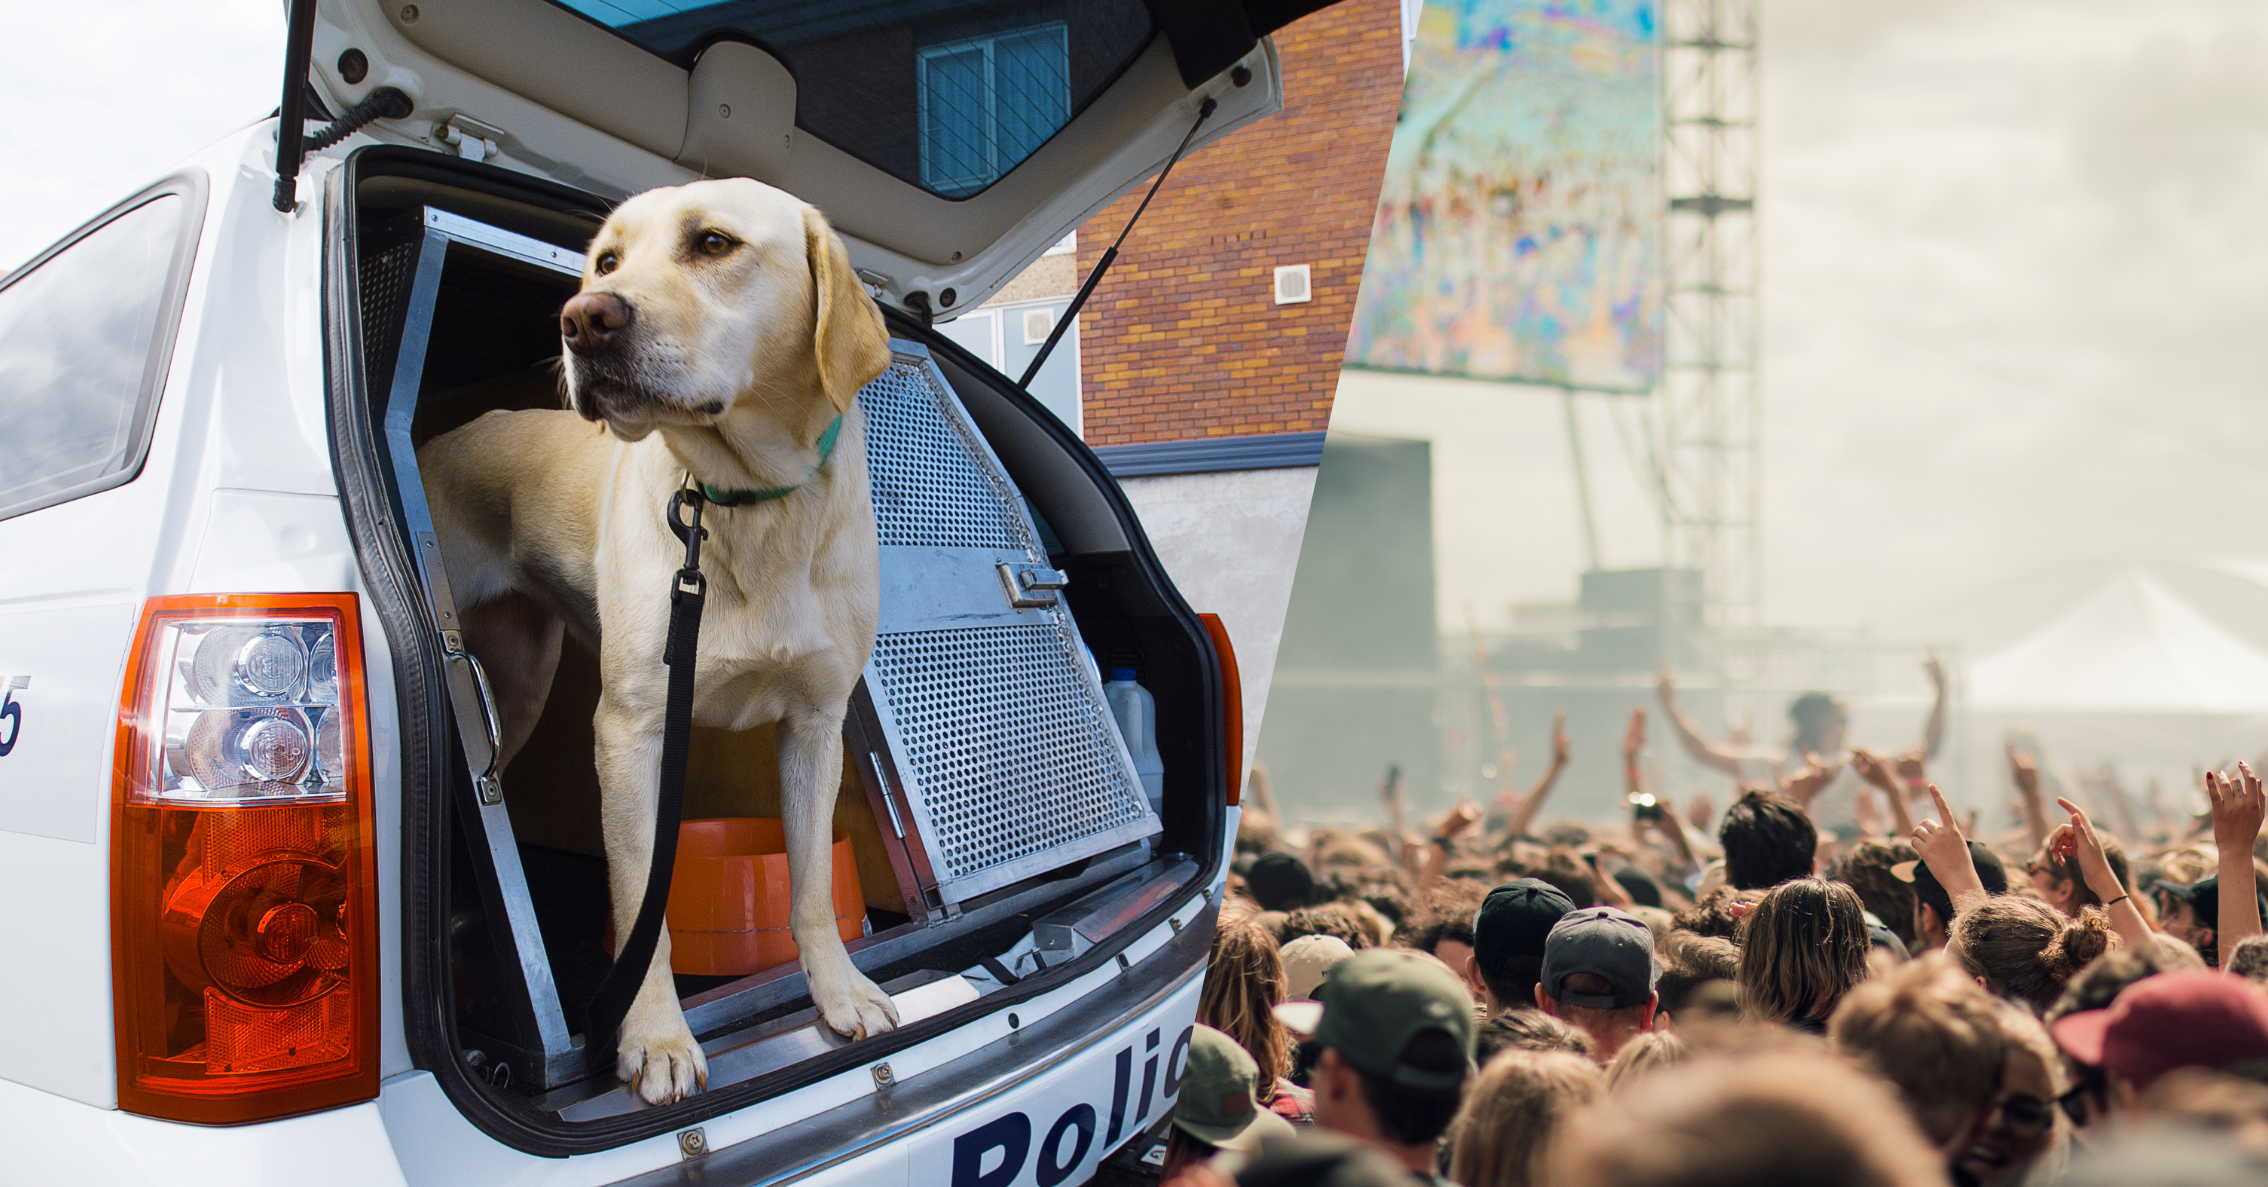 Featured image for “Increasing Harm: The Dangers of Sniffer Dog Operations”